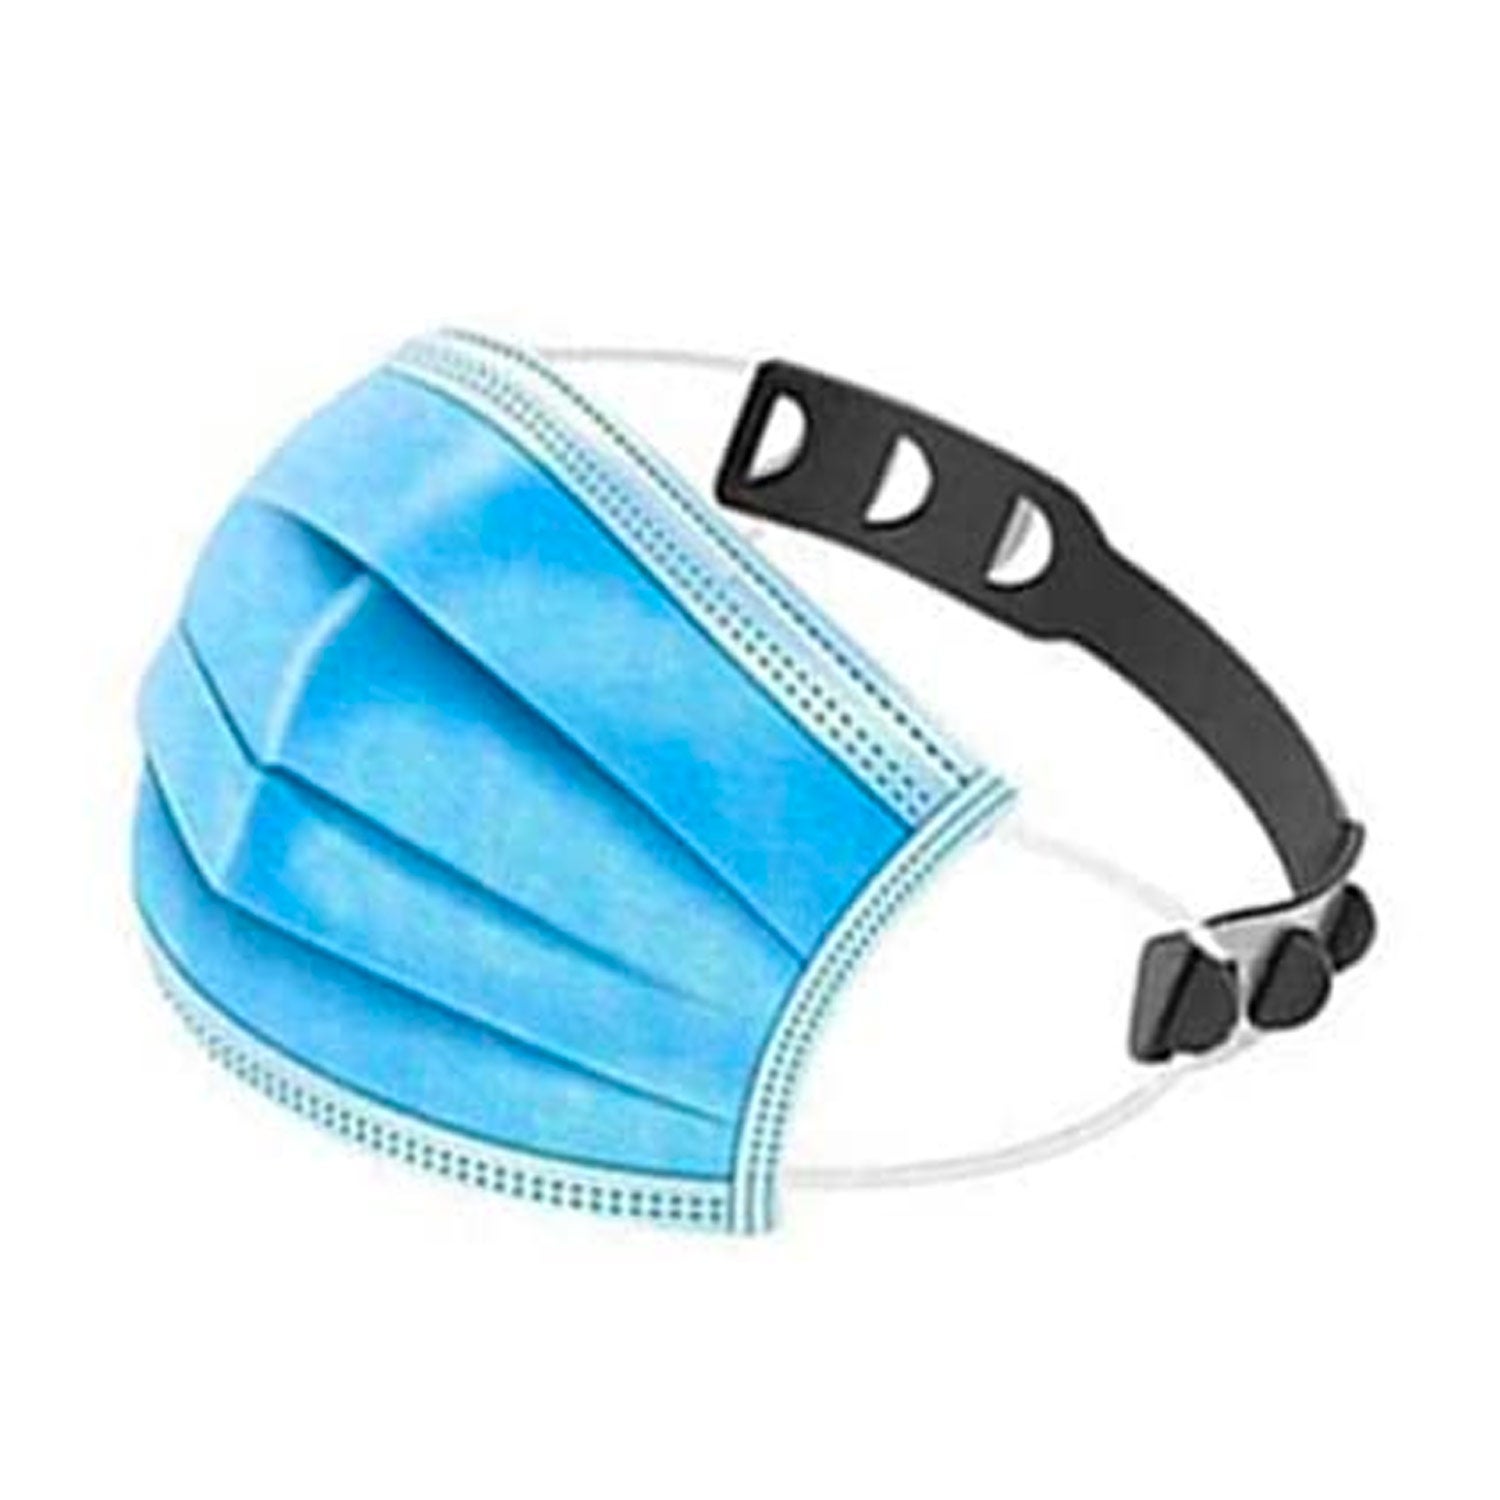 A surgical mask with a mask strap extender.